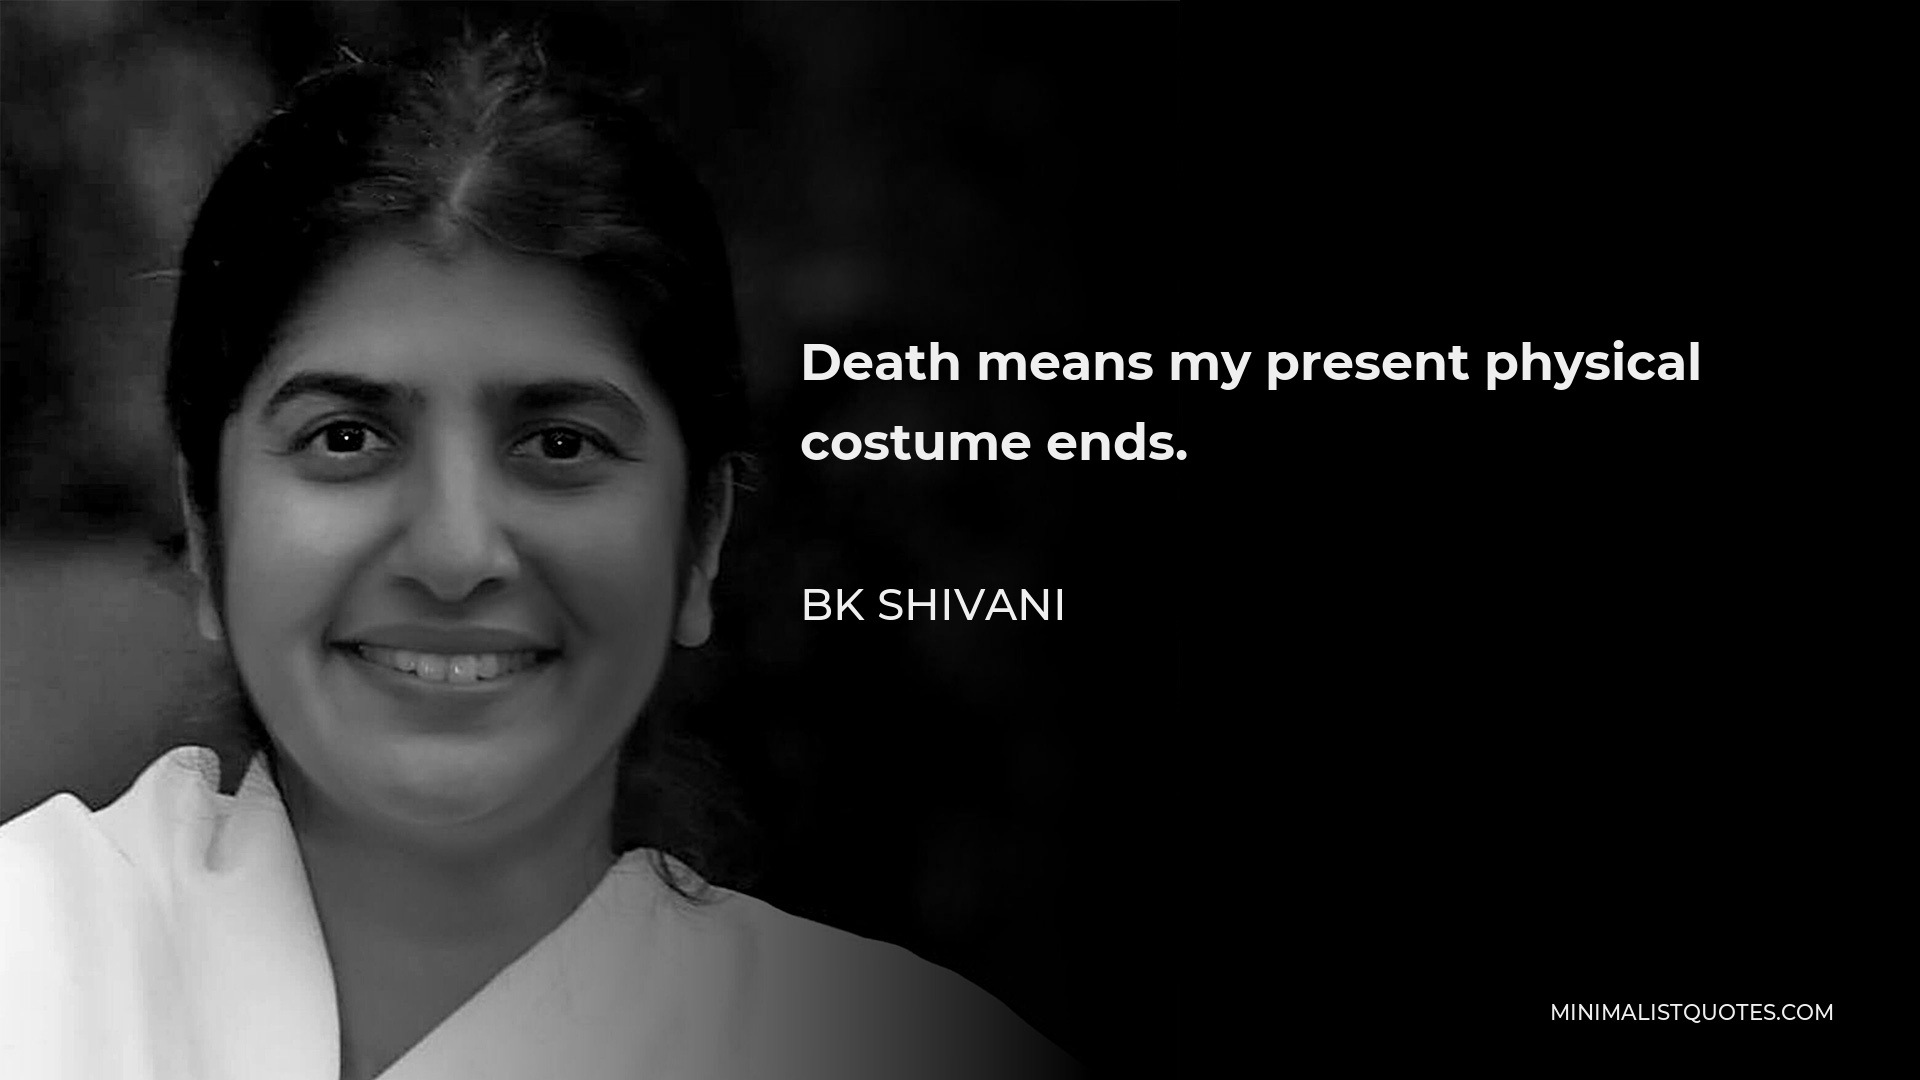 BK Shivani Quote - Death means my present physical costume ends.